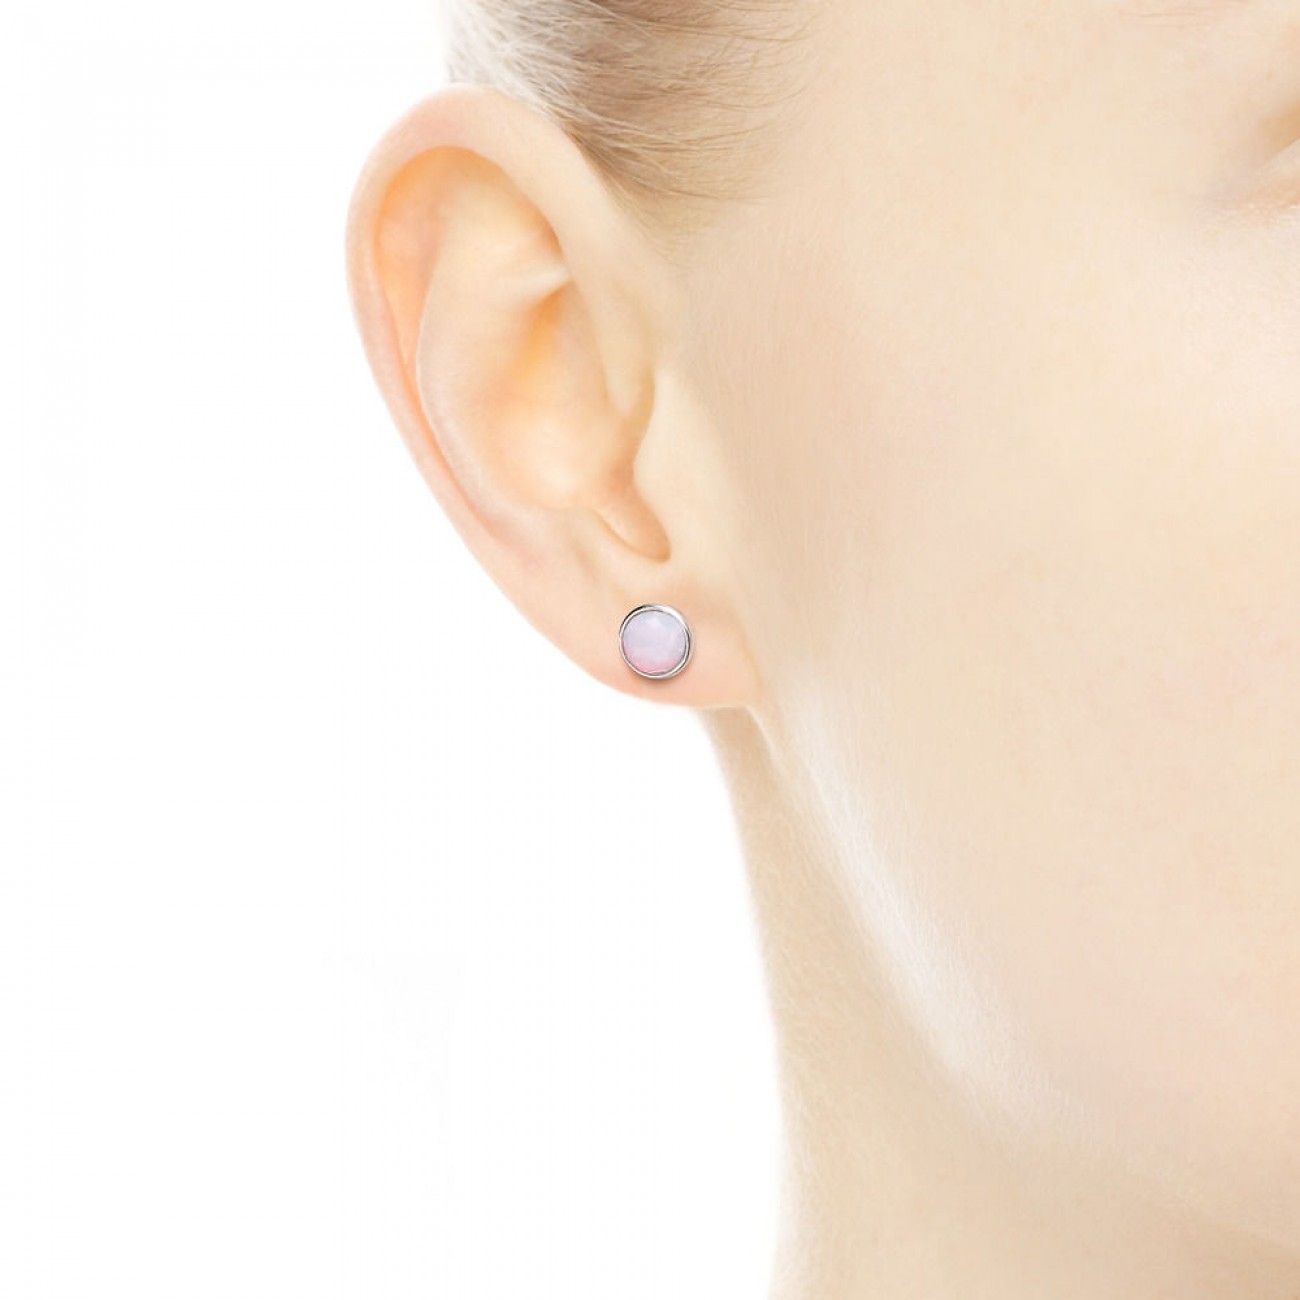 October Droplets Stud Earrings, Opalescent Pink Crystal Intended For 2019 Opalescent Pink Crystal October Droplet Pendant Necklaces (View 9 of 25)